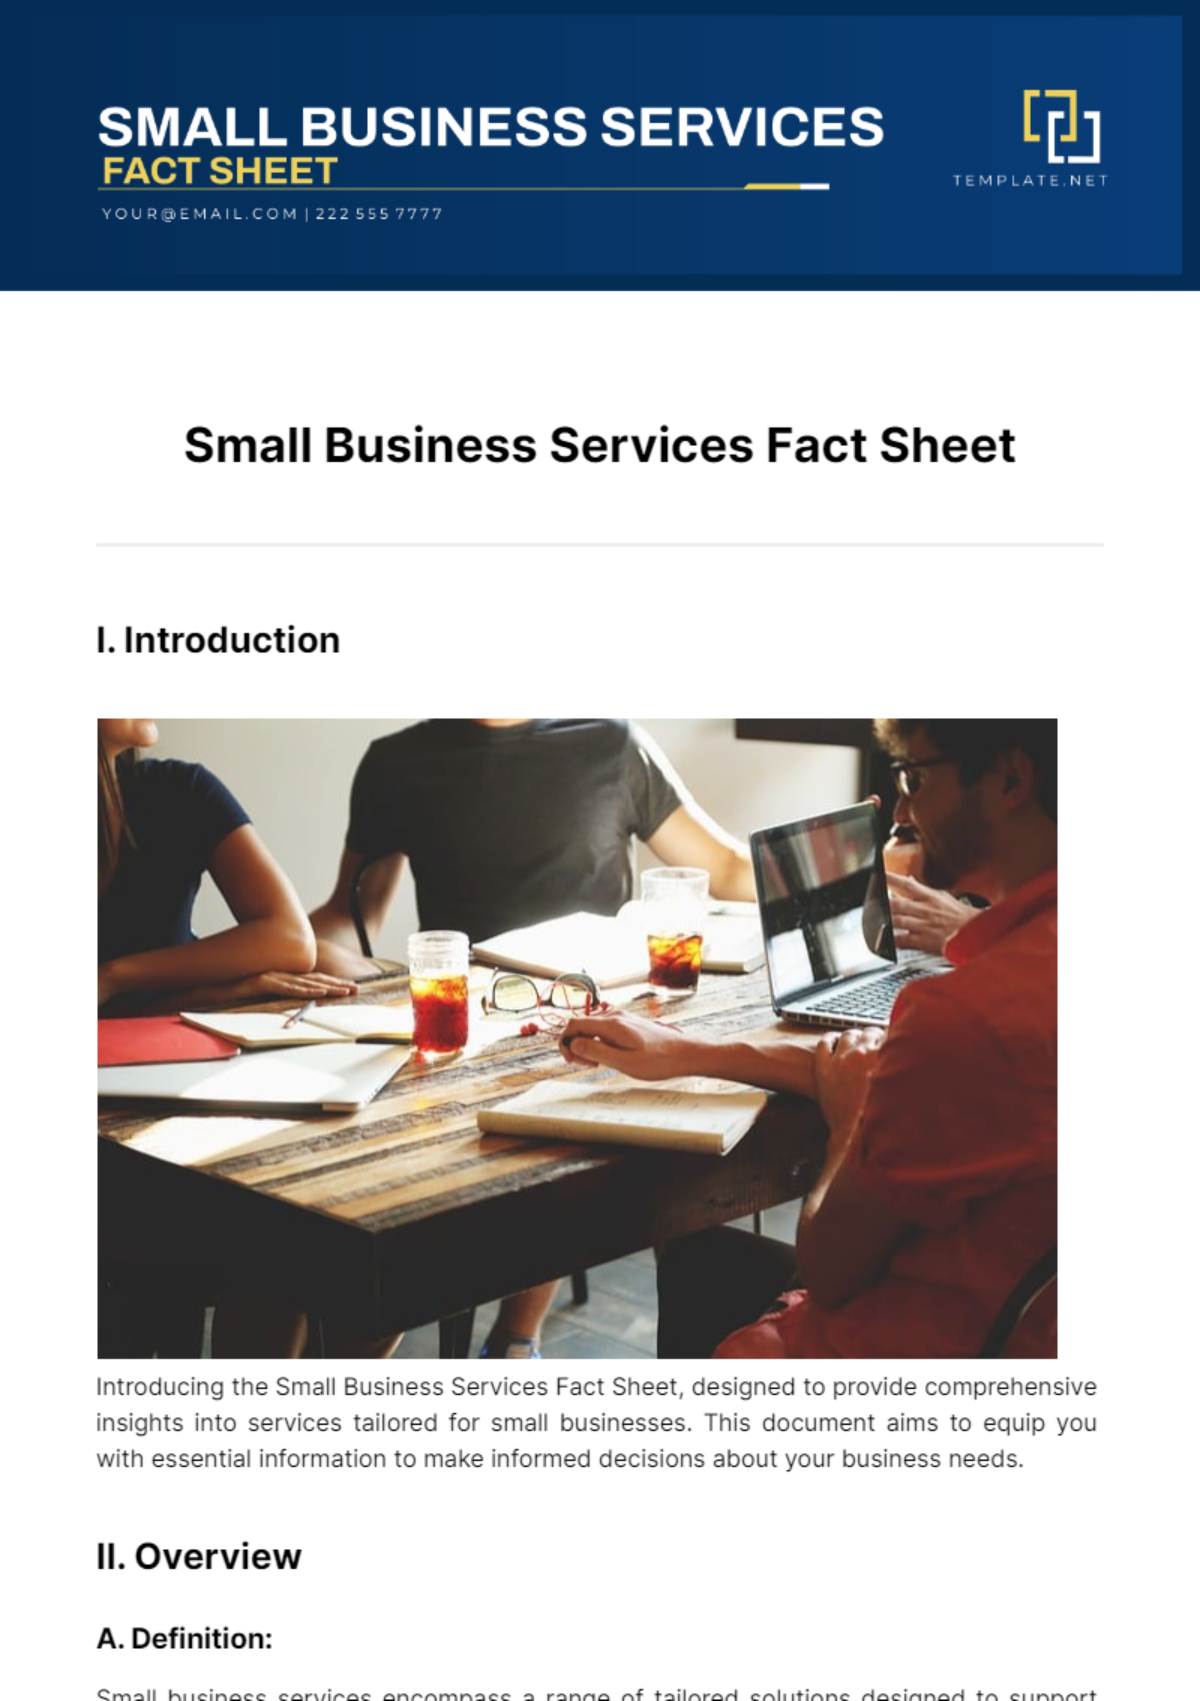 Small Business Services Fact Sheet Template